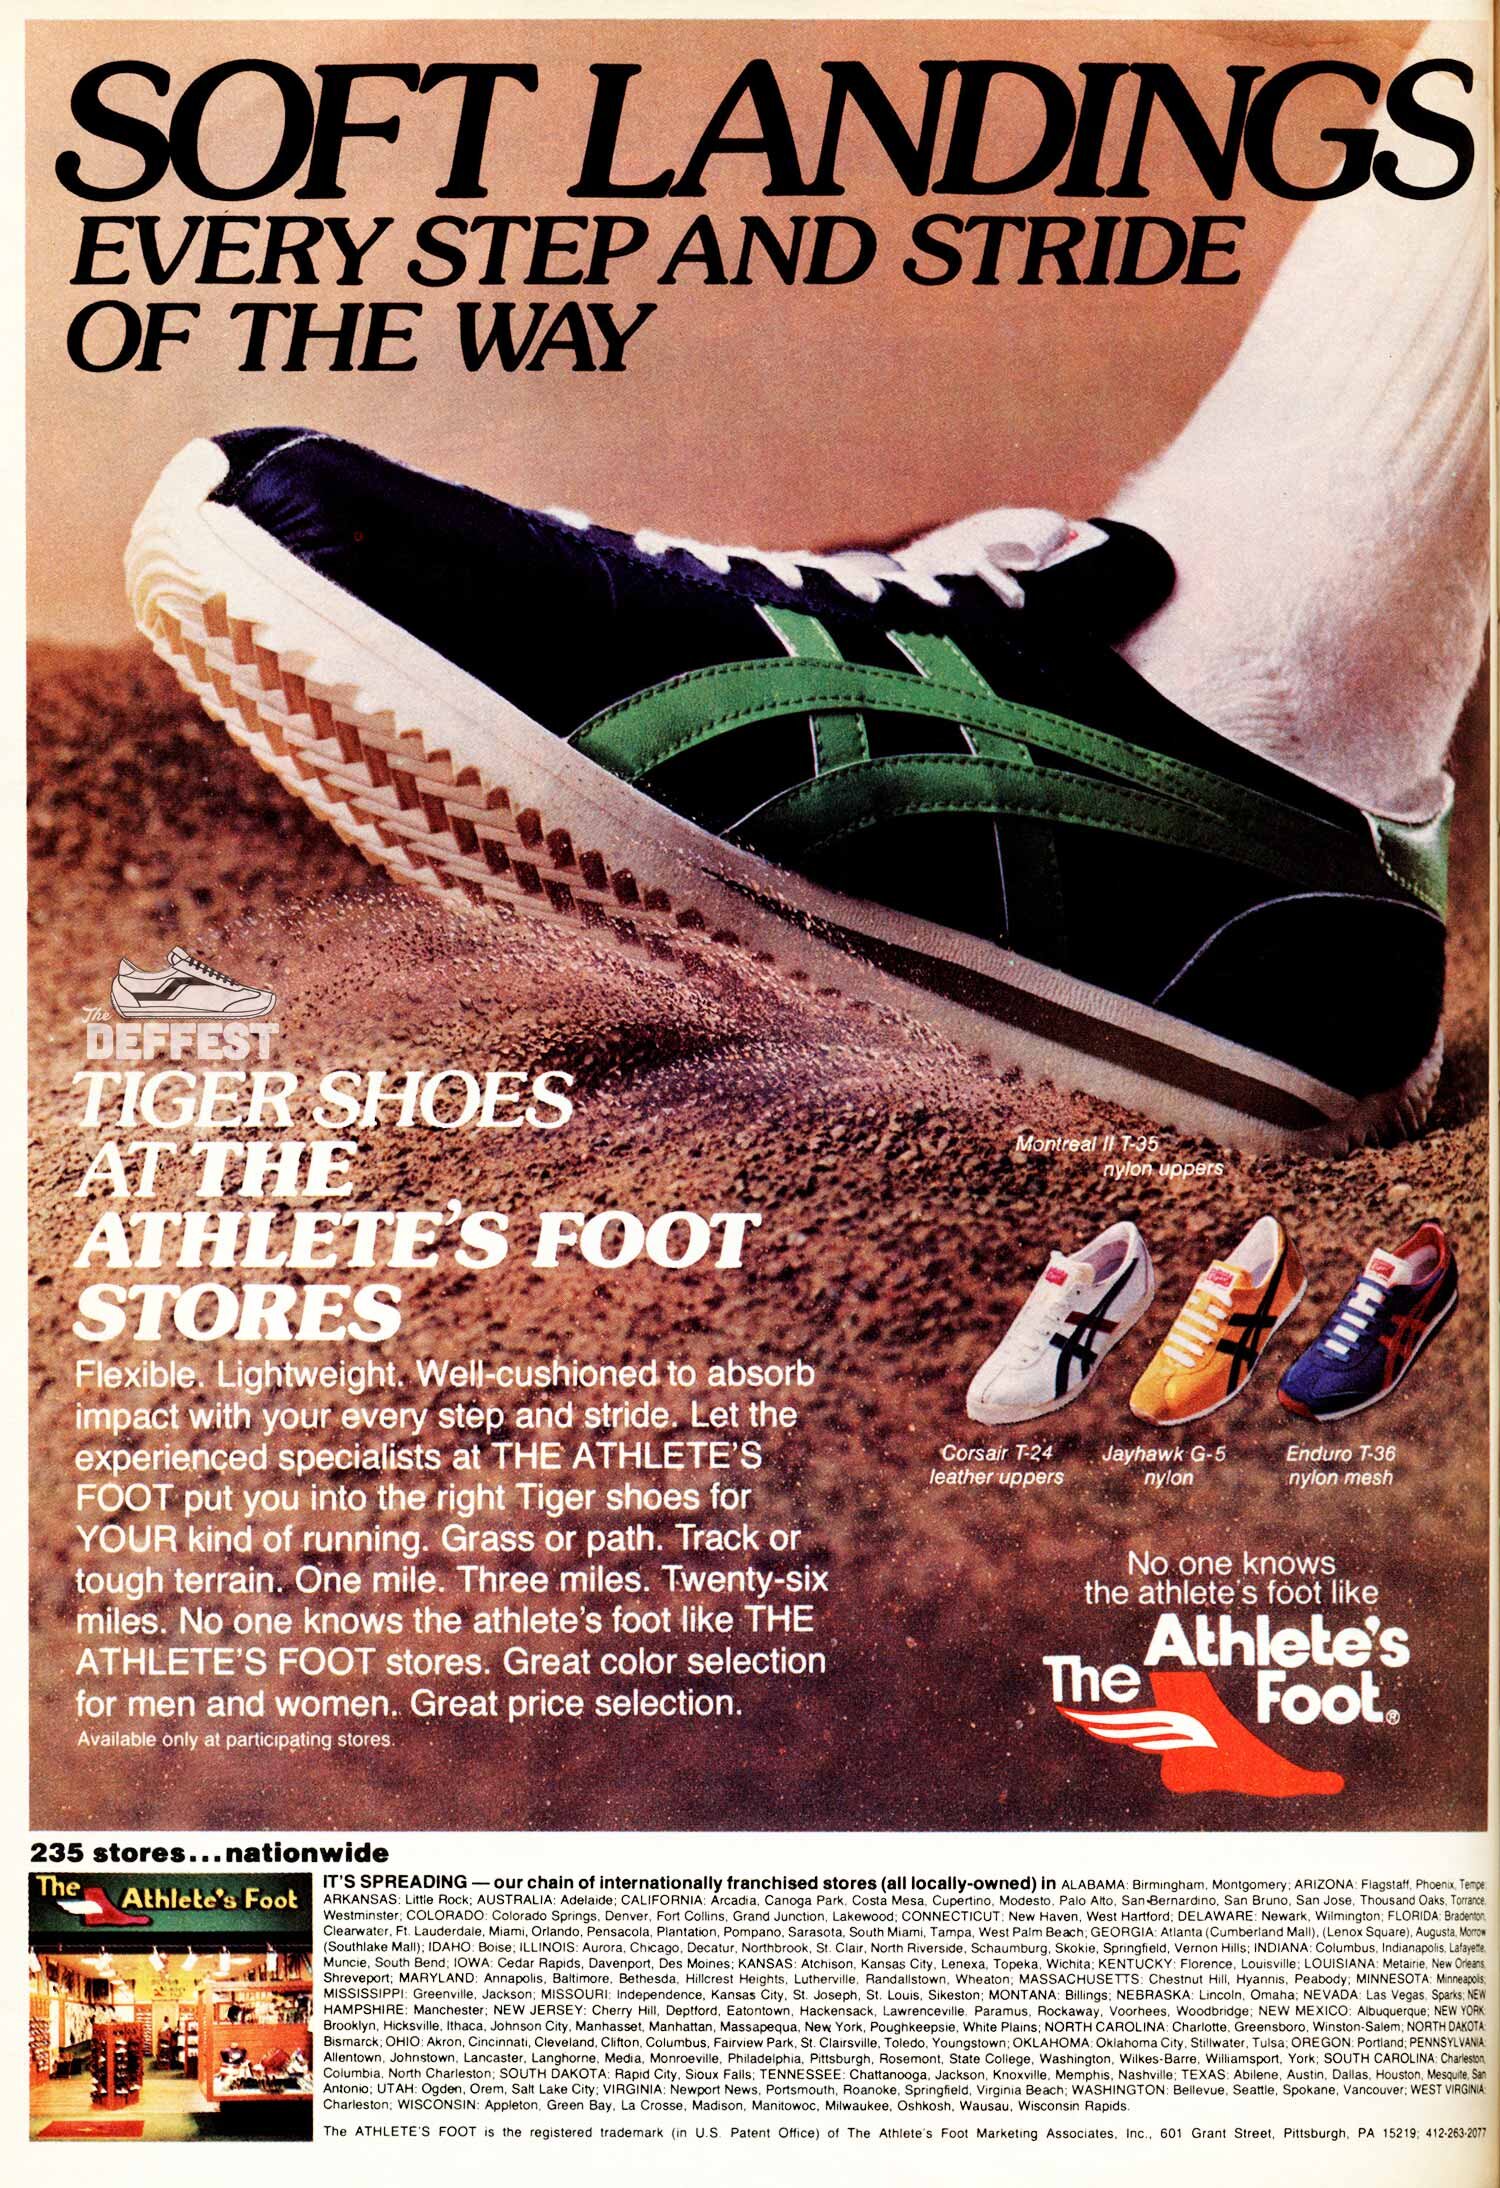 Deffest®. A vintage and sneaker blog. — Asics Onitsuka 1978 vintage sneaker ad featuring the Montreal II, Jayhawk and Enduro